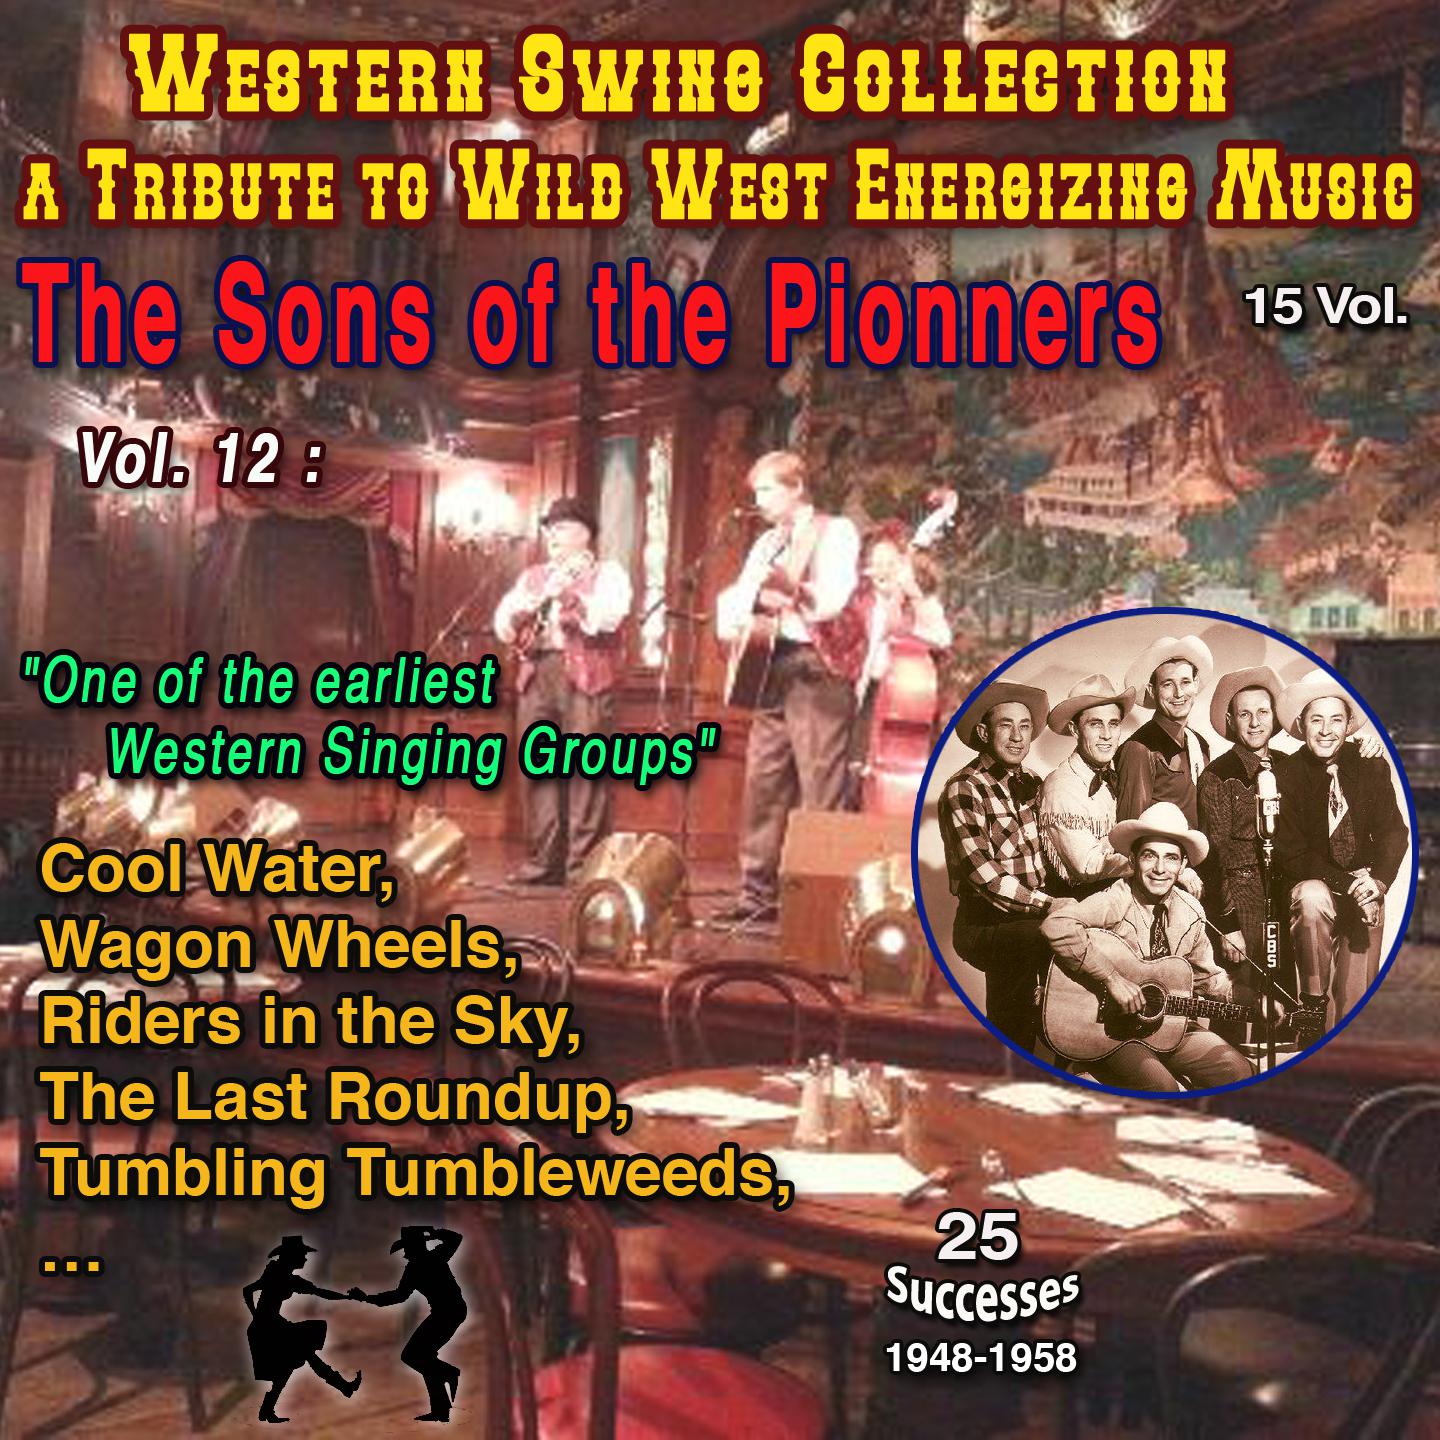 Постер альбома Western Swing Collection : a Tribute to Wild West Energizing Music 15 Vol. Vol. 12 : The Sons of The Pioneers "One of the earliest Wester Siing Groups"